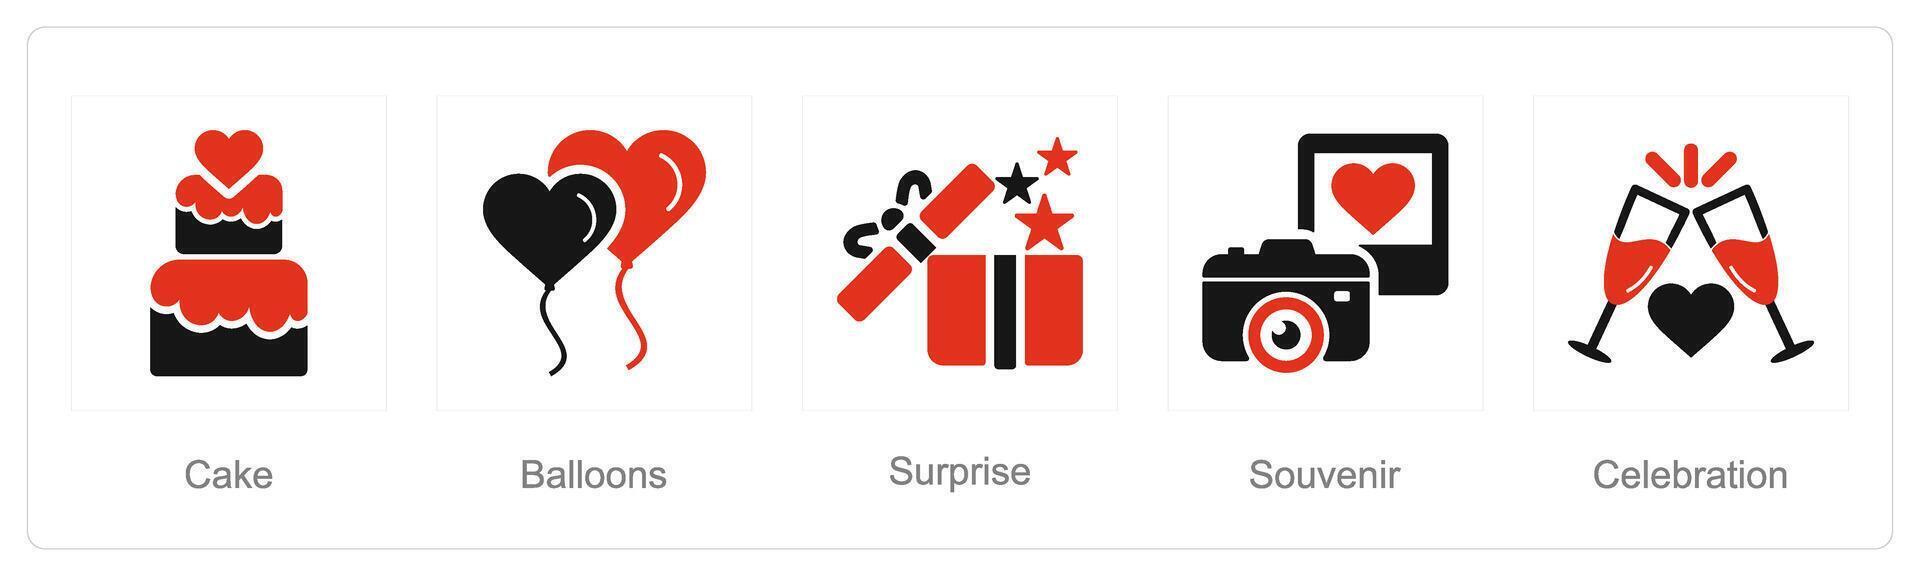 A set of 5 Honeymoon icons as cake, balloons, surprise vector